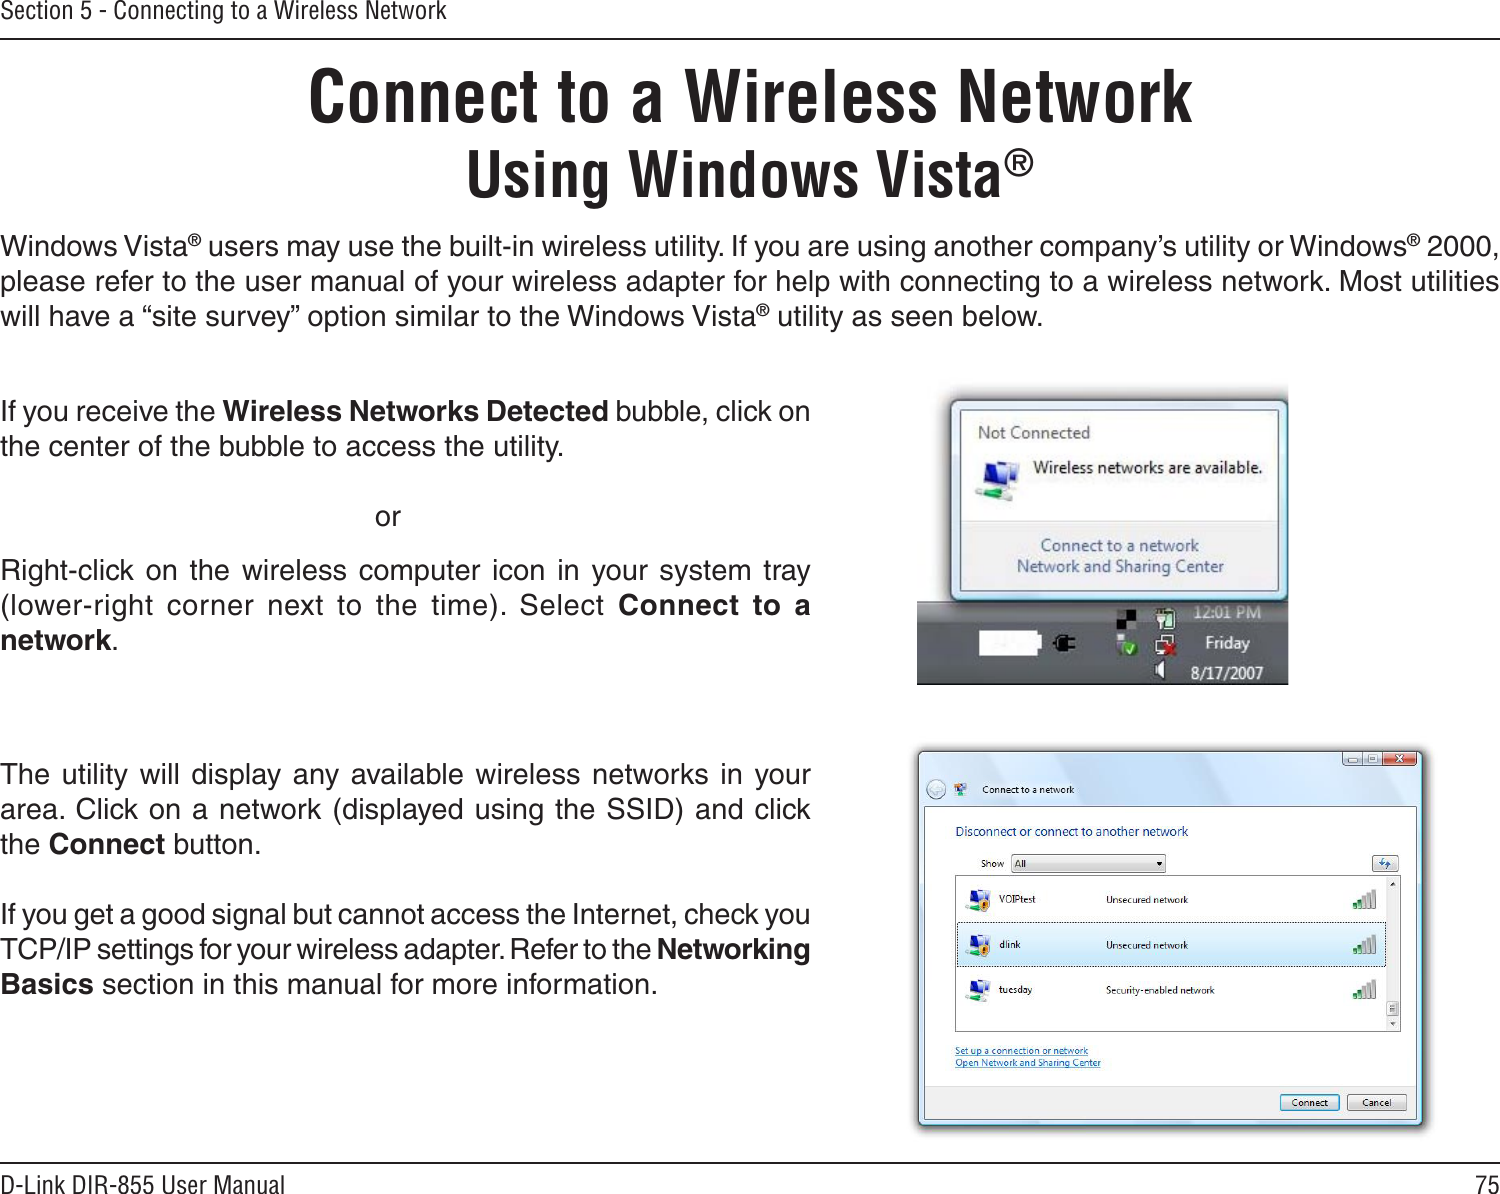 75D-Link DIR-855 User ManualSection 5 - Connecting to a Wireless NetworkConnect to a Wireless NetworkUsing Windows Vista®Windows Vista® users may use the built-in wireless utility. If you are using another company’s utility or Windows® 2000, please refer to the user manual of your wireless adapter for help with connecting to a wireless network. Most utilities will have a “site survey” option similar to the Windows Vista® utility as seen below.Right-click  on  the  wireless  computer  icon  in  your  system  tray (lower-right  corner  next  to  the  time).  Select  Connect  to  a network.If you receive the Wireless Networks Detected bubble, click on the center of the bubble to access the utility.     orThe utility will  display any  available wireless networks in  your area. Click on a network (displayed using the SSID) and click the Connect button.If you get a good signal but cannot access the Internet, check you TCP/IP settings for your wireless adapter. Refer to the Networking Basics section in this manual for more information.